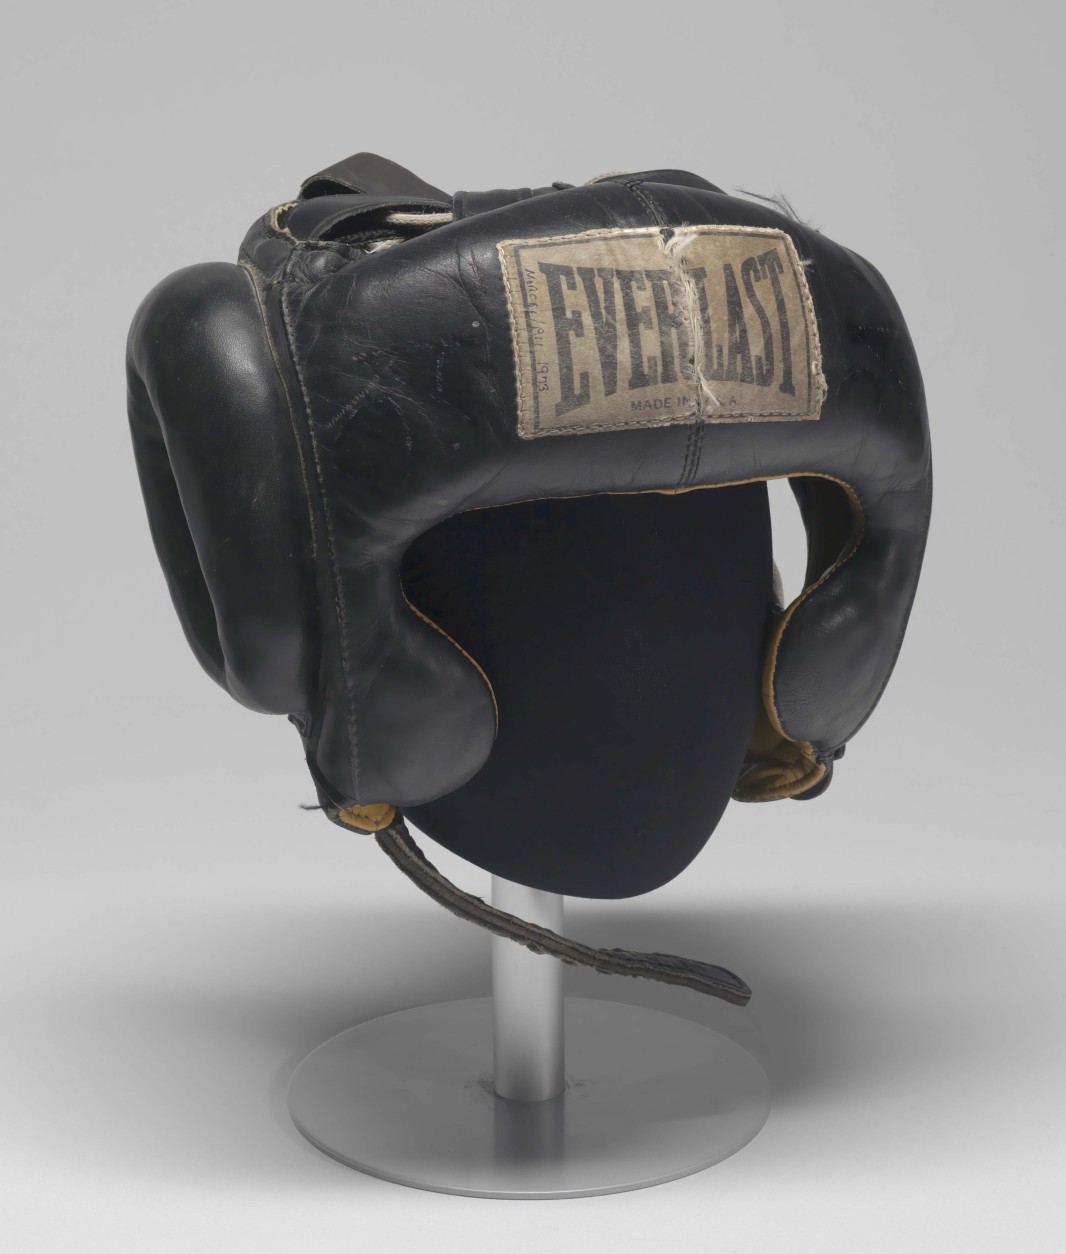 Boxing gear worn by Muhammad Ali circa 1973. The headgear is an item in the collection of the Smithsonian National Museum of African American History and Culture. (Courtesy Collection of the Smithsonian National Museum of African American History and Culture)